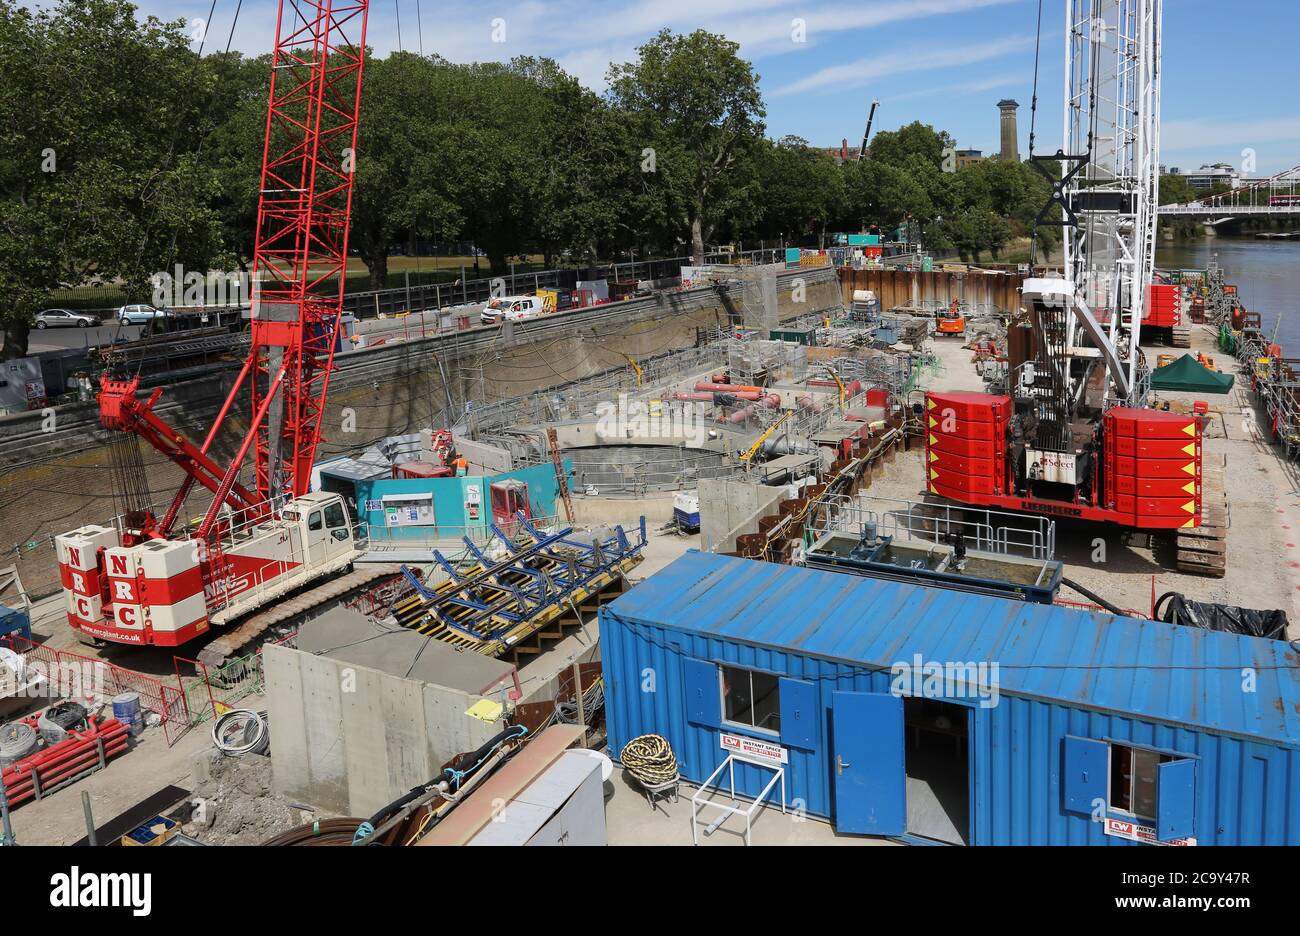 The Thames Tideway sewer construction site at Chelsea Embankment, London. Shows the steel cofferdam and concrete shafts to the main tunnel 50m below. Stock Photo